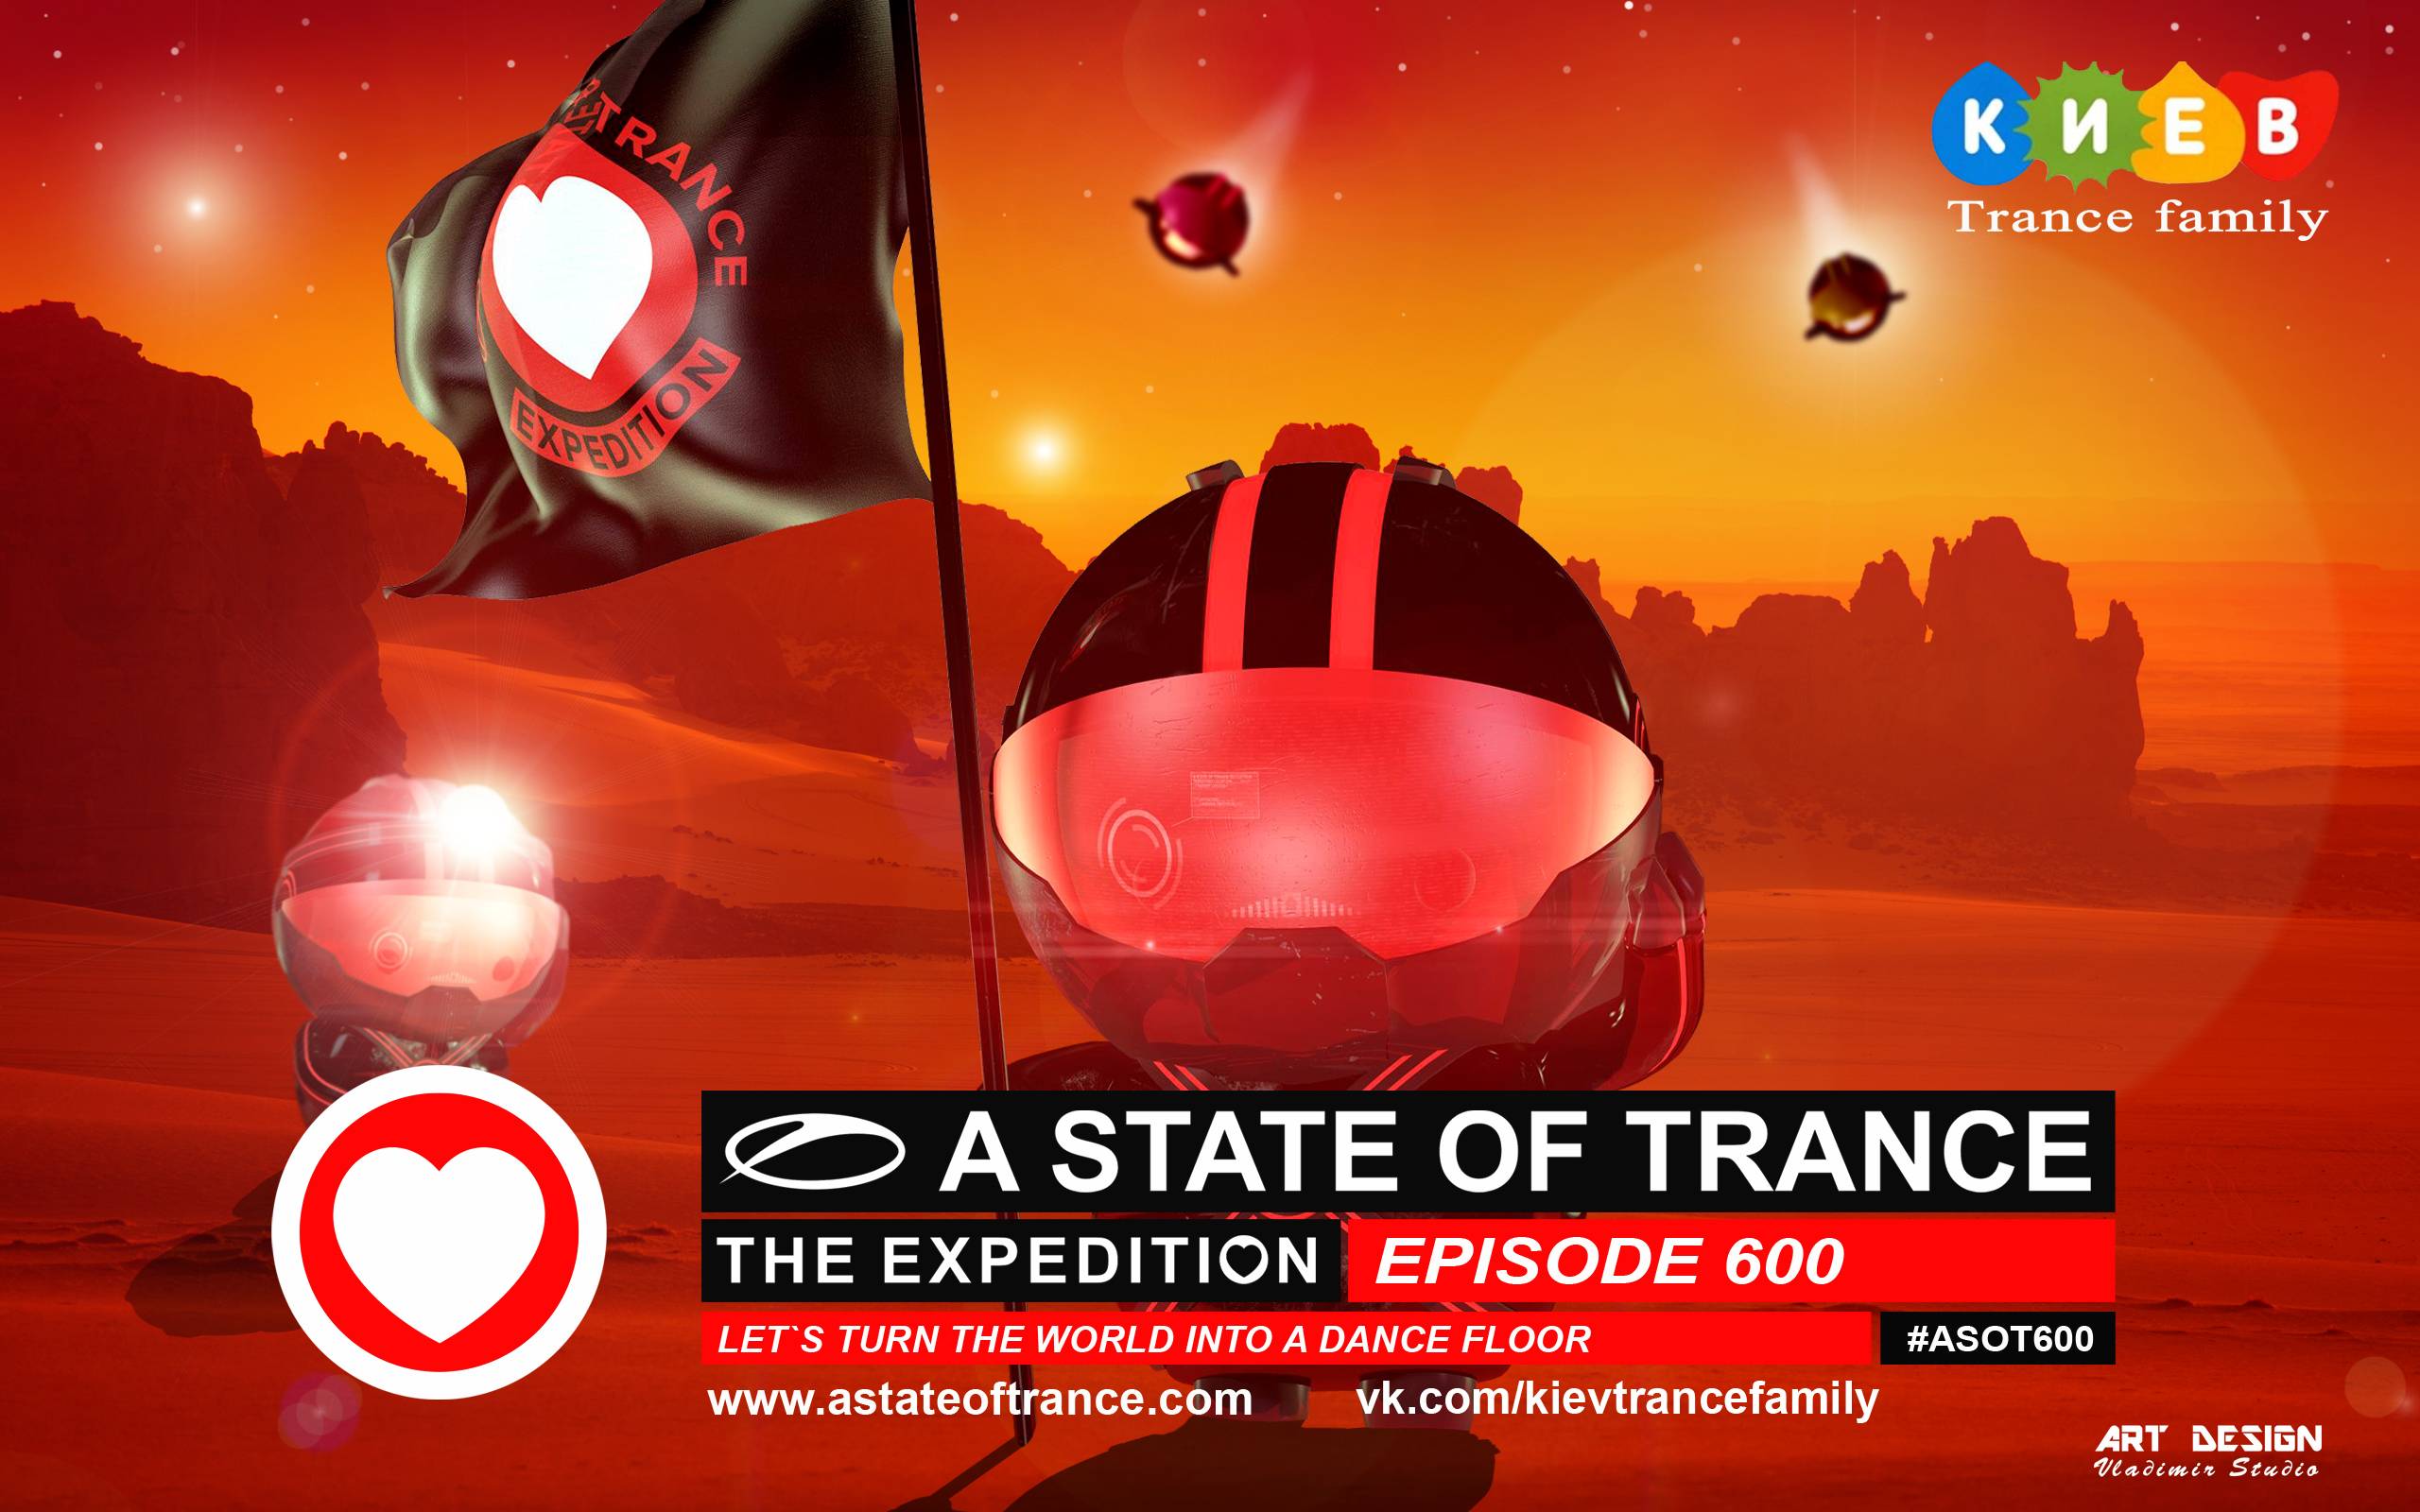 Wallpaper For > A State Of Trance 600 Wallpaper